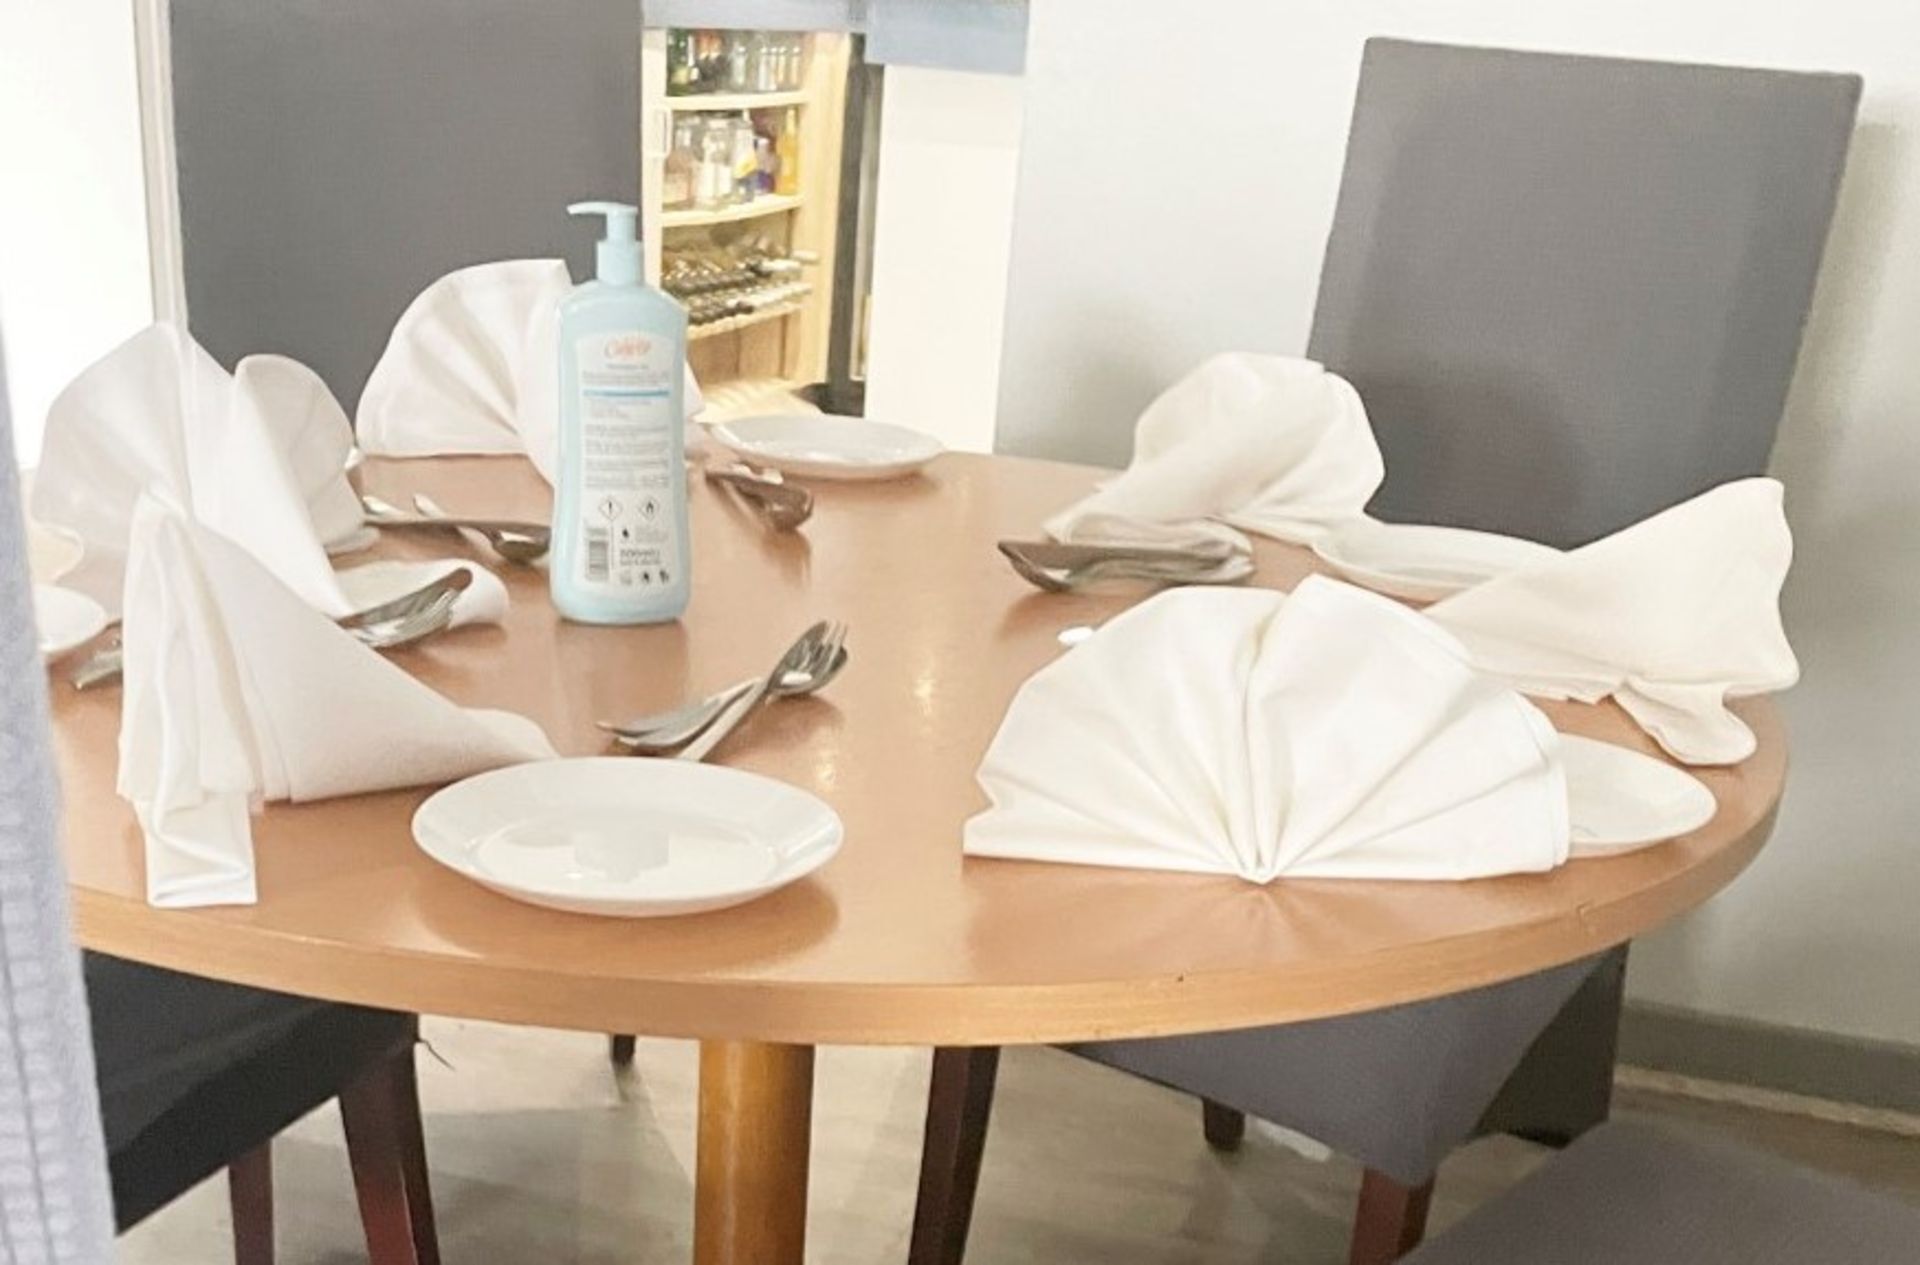 50 x White Dinner Plates, 50 x Fabric Napkins and 150 x Pieces of Contemporary Cutlery - Ref: JMR000 - Image 3 of 5